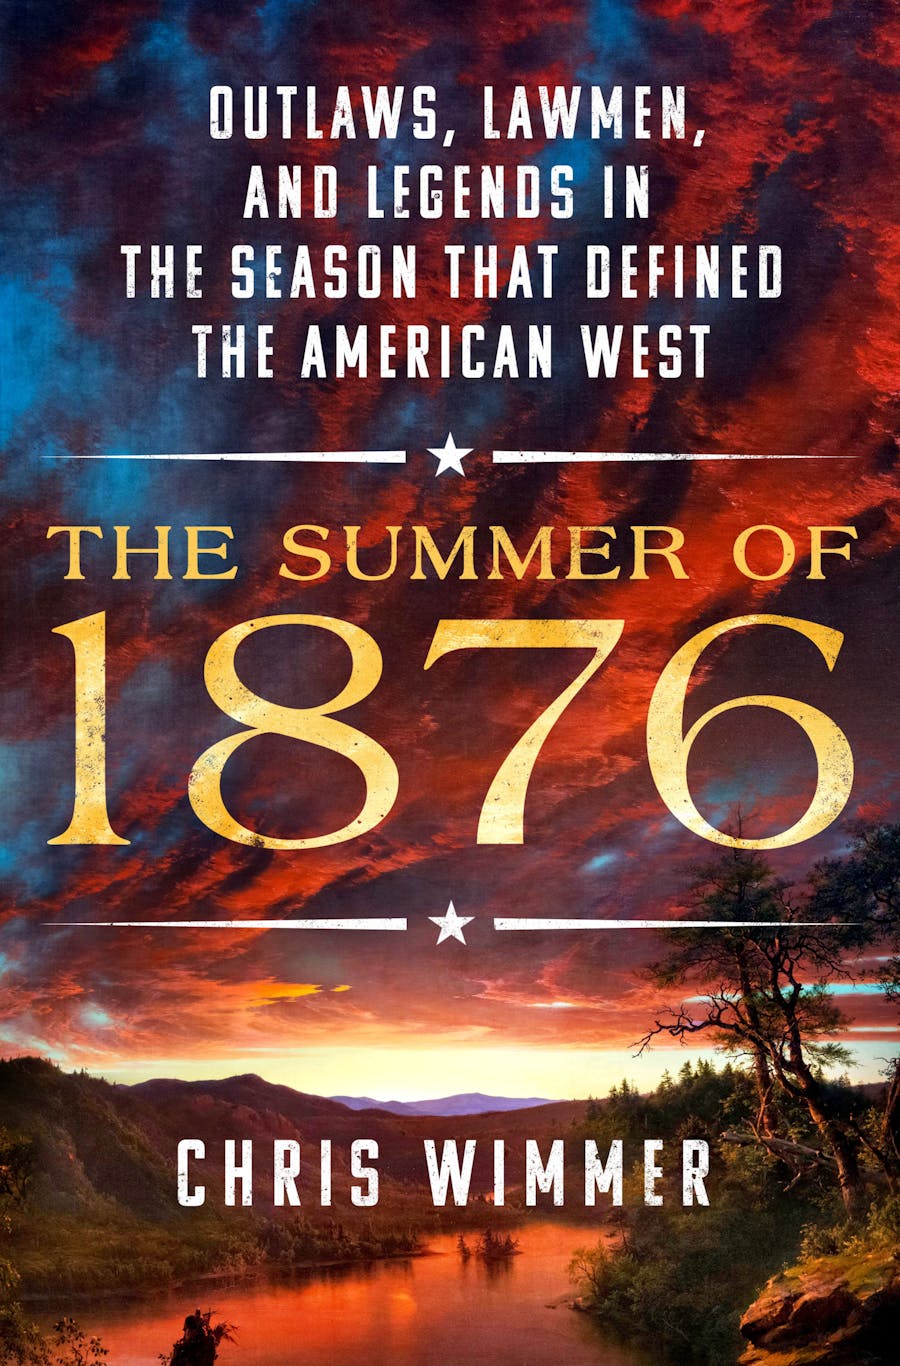 The Summer of 1876: Outlaws, Lawmen, and Legends in the Season that Defined the American West